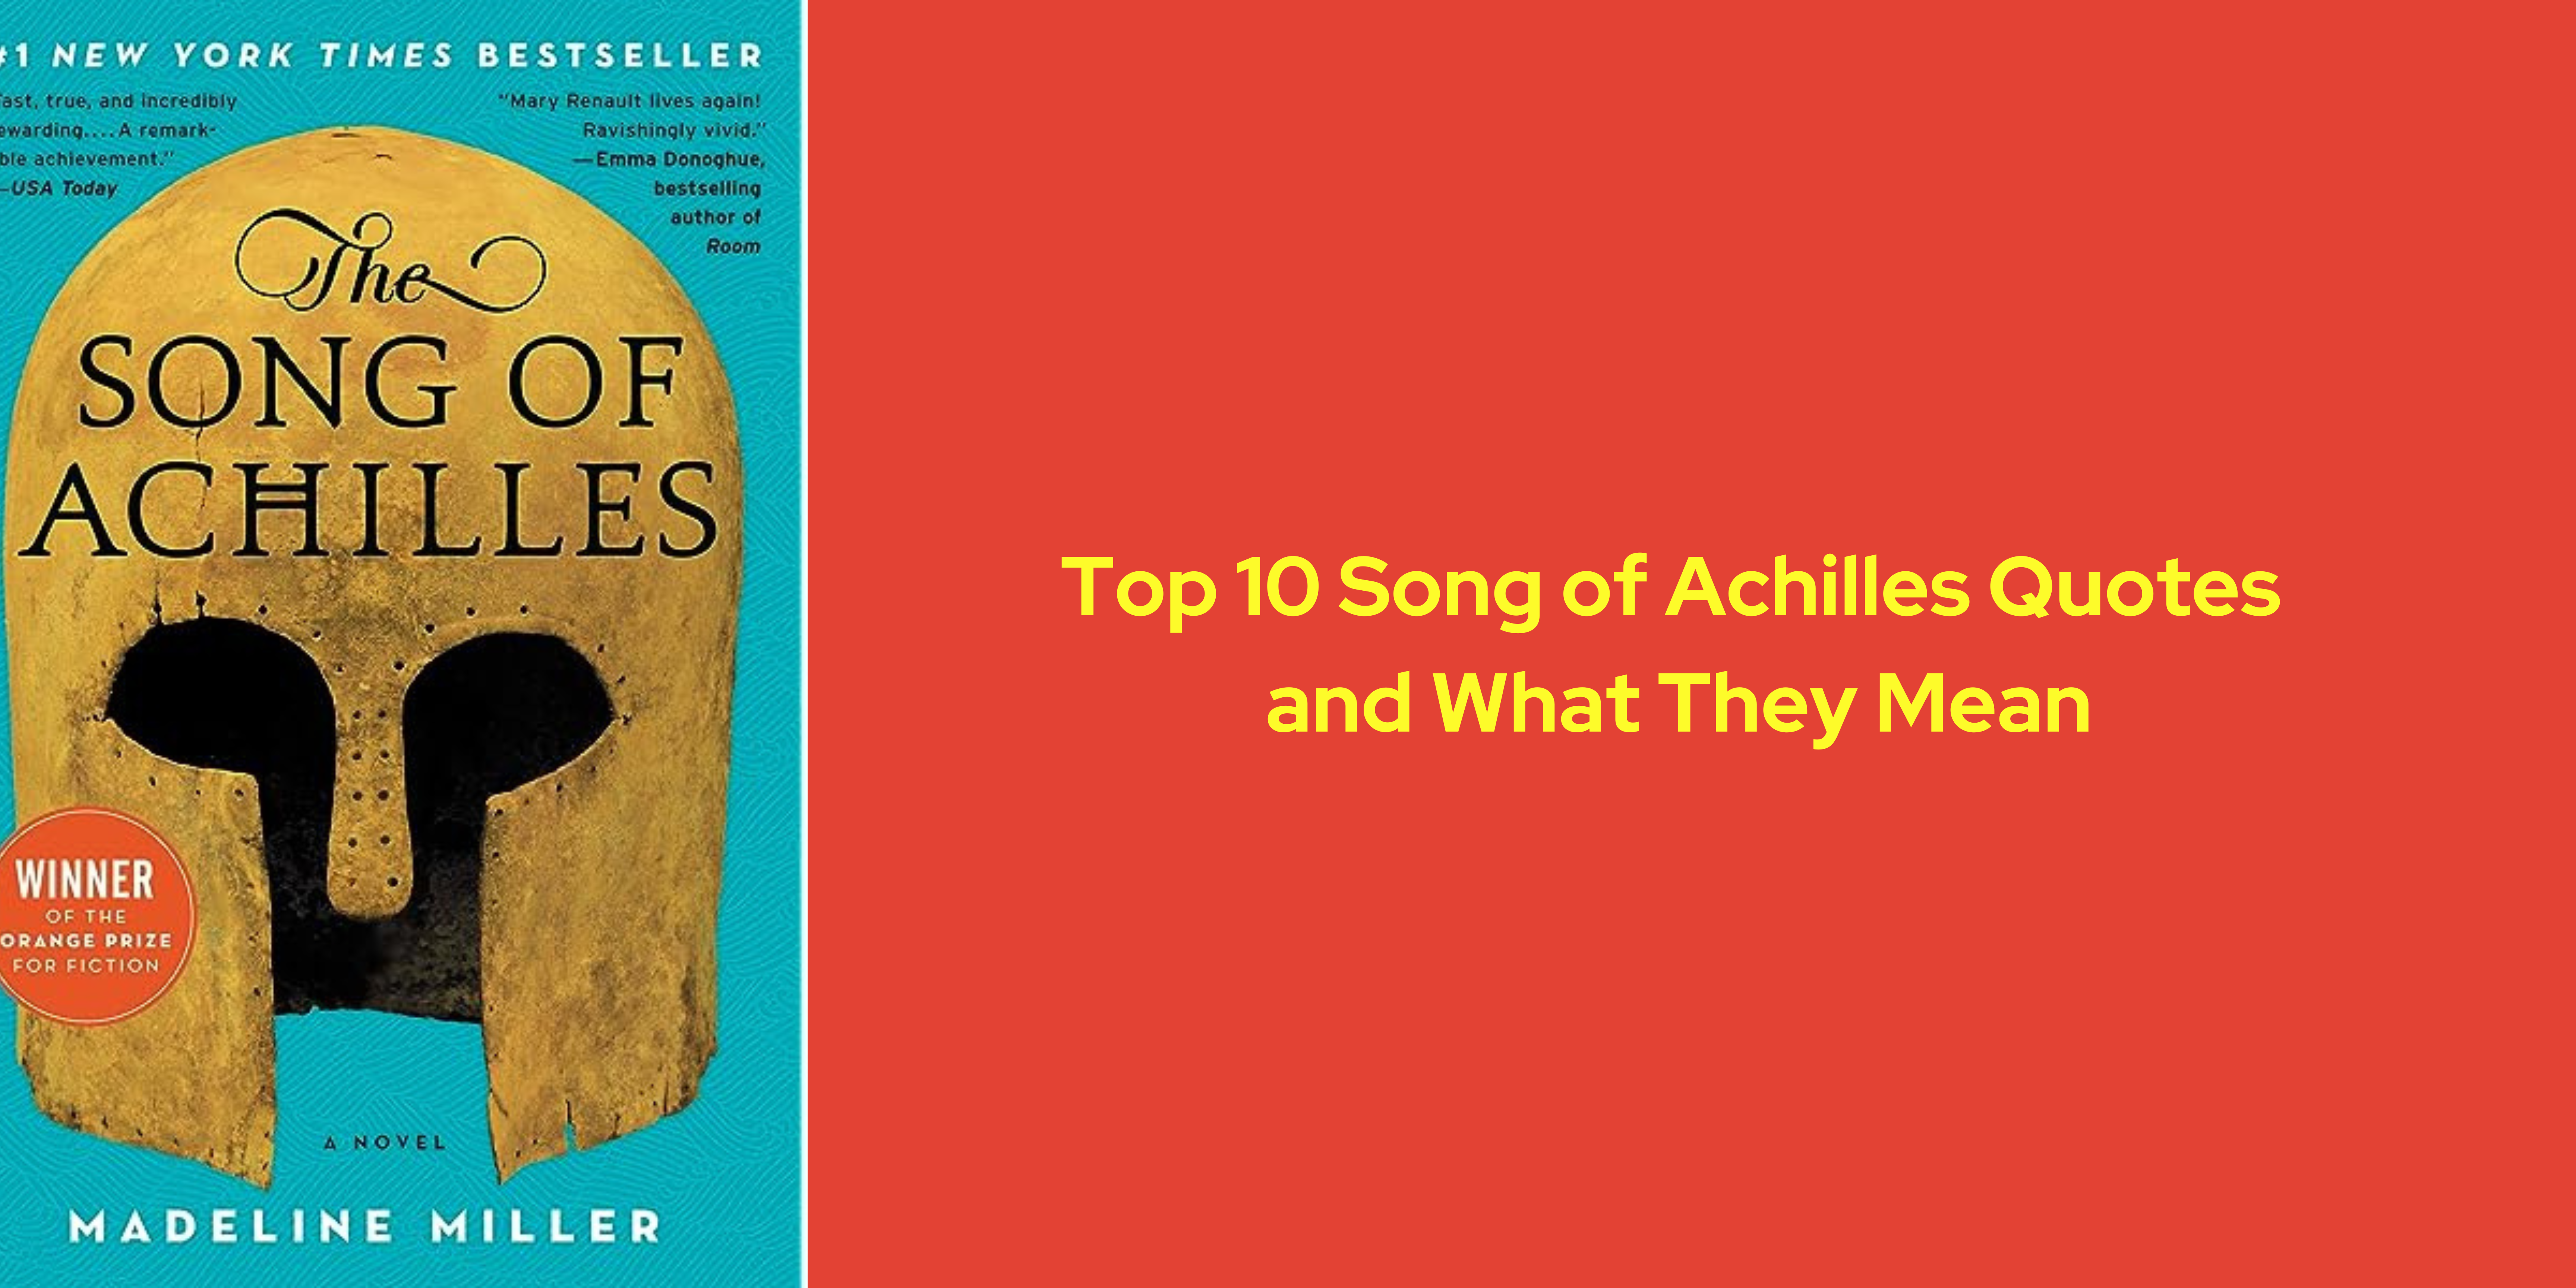 Top 10 Song of Achilles Quotes and What They Mean